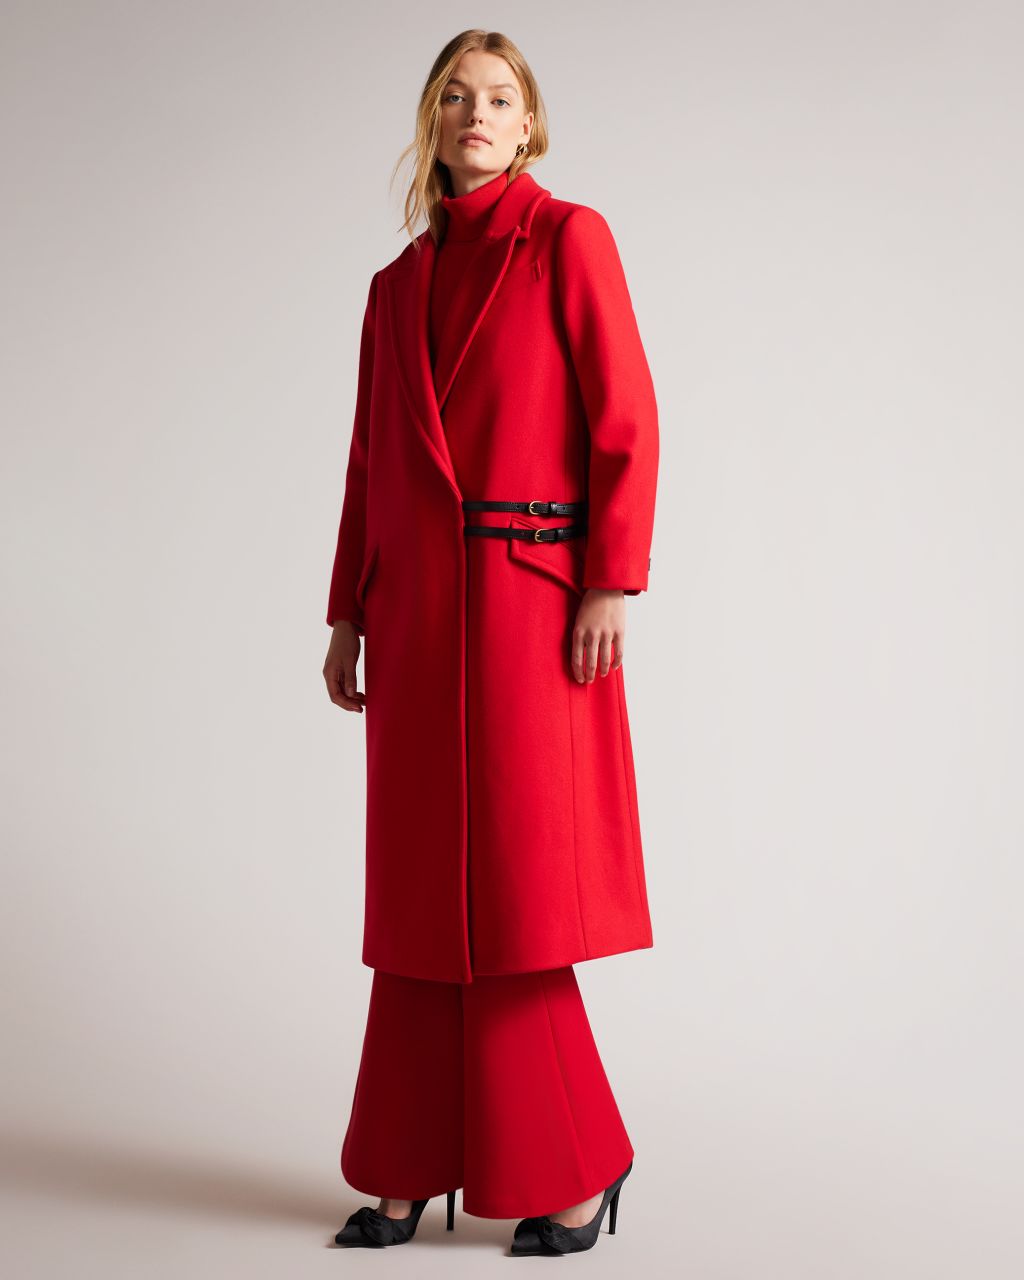 Ted Baker Women's City Coat With Detachable Strap Detail in Red, Frejia, Wool